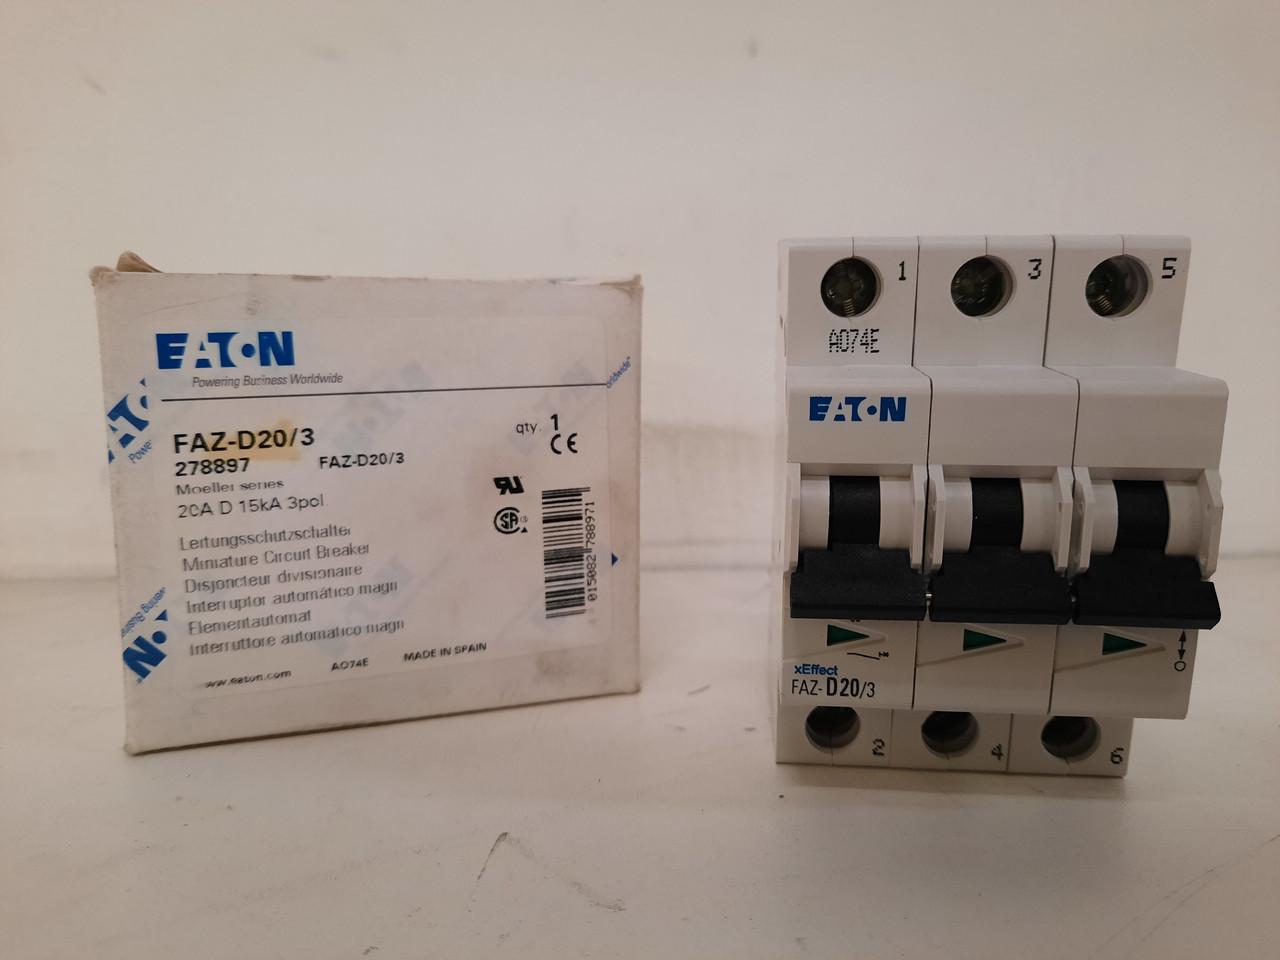 Eaton FAZ-D20/3 Eaton FAZ supplementary protector,UL 1077 Industrial miniature circuit breaker - supplementary protector,High levels of inrush current are expected,20 A,15 kAIC,Three-pole,10-20X /n,50-60 Hz,Standard terminals,D Curve